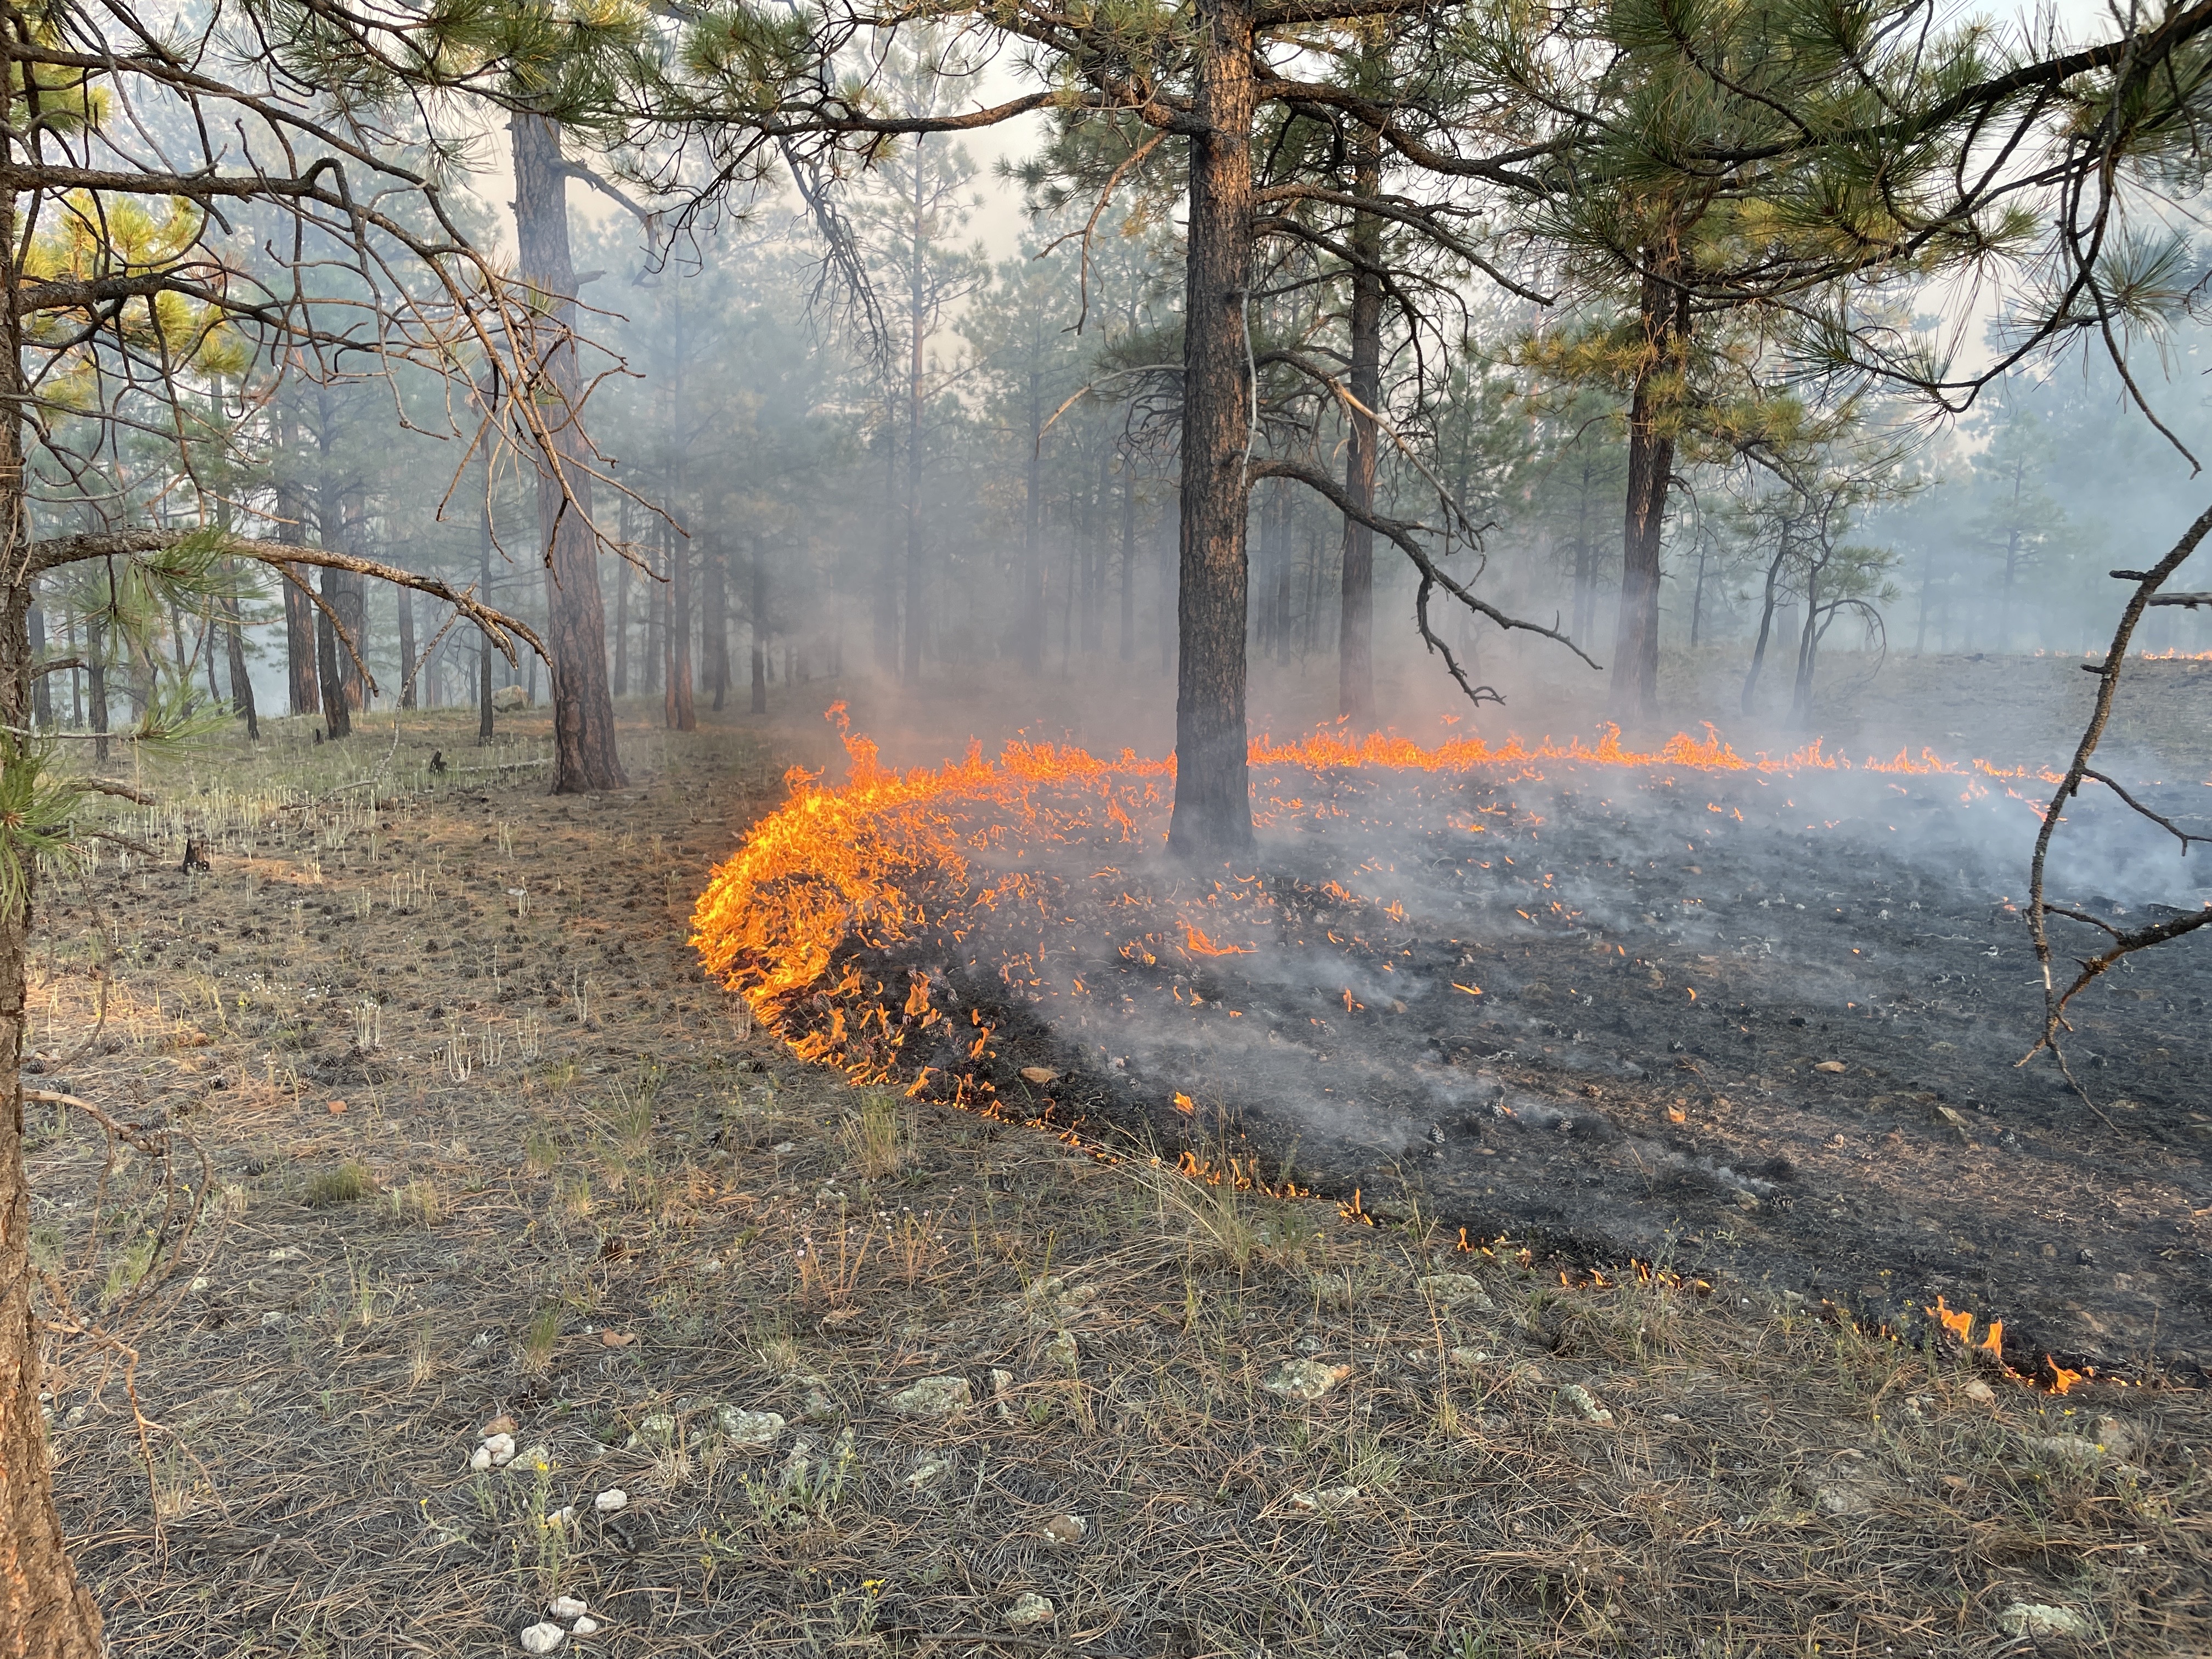 Fire burning on the ground in the forest